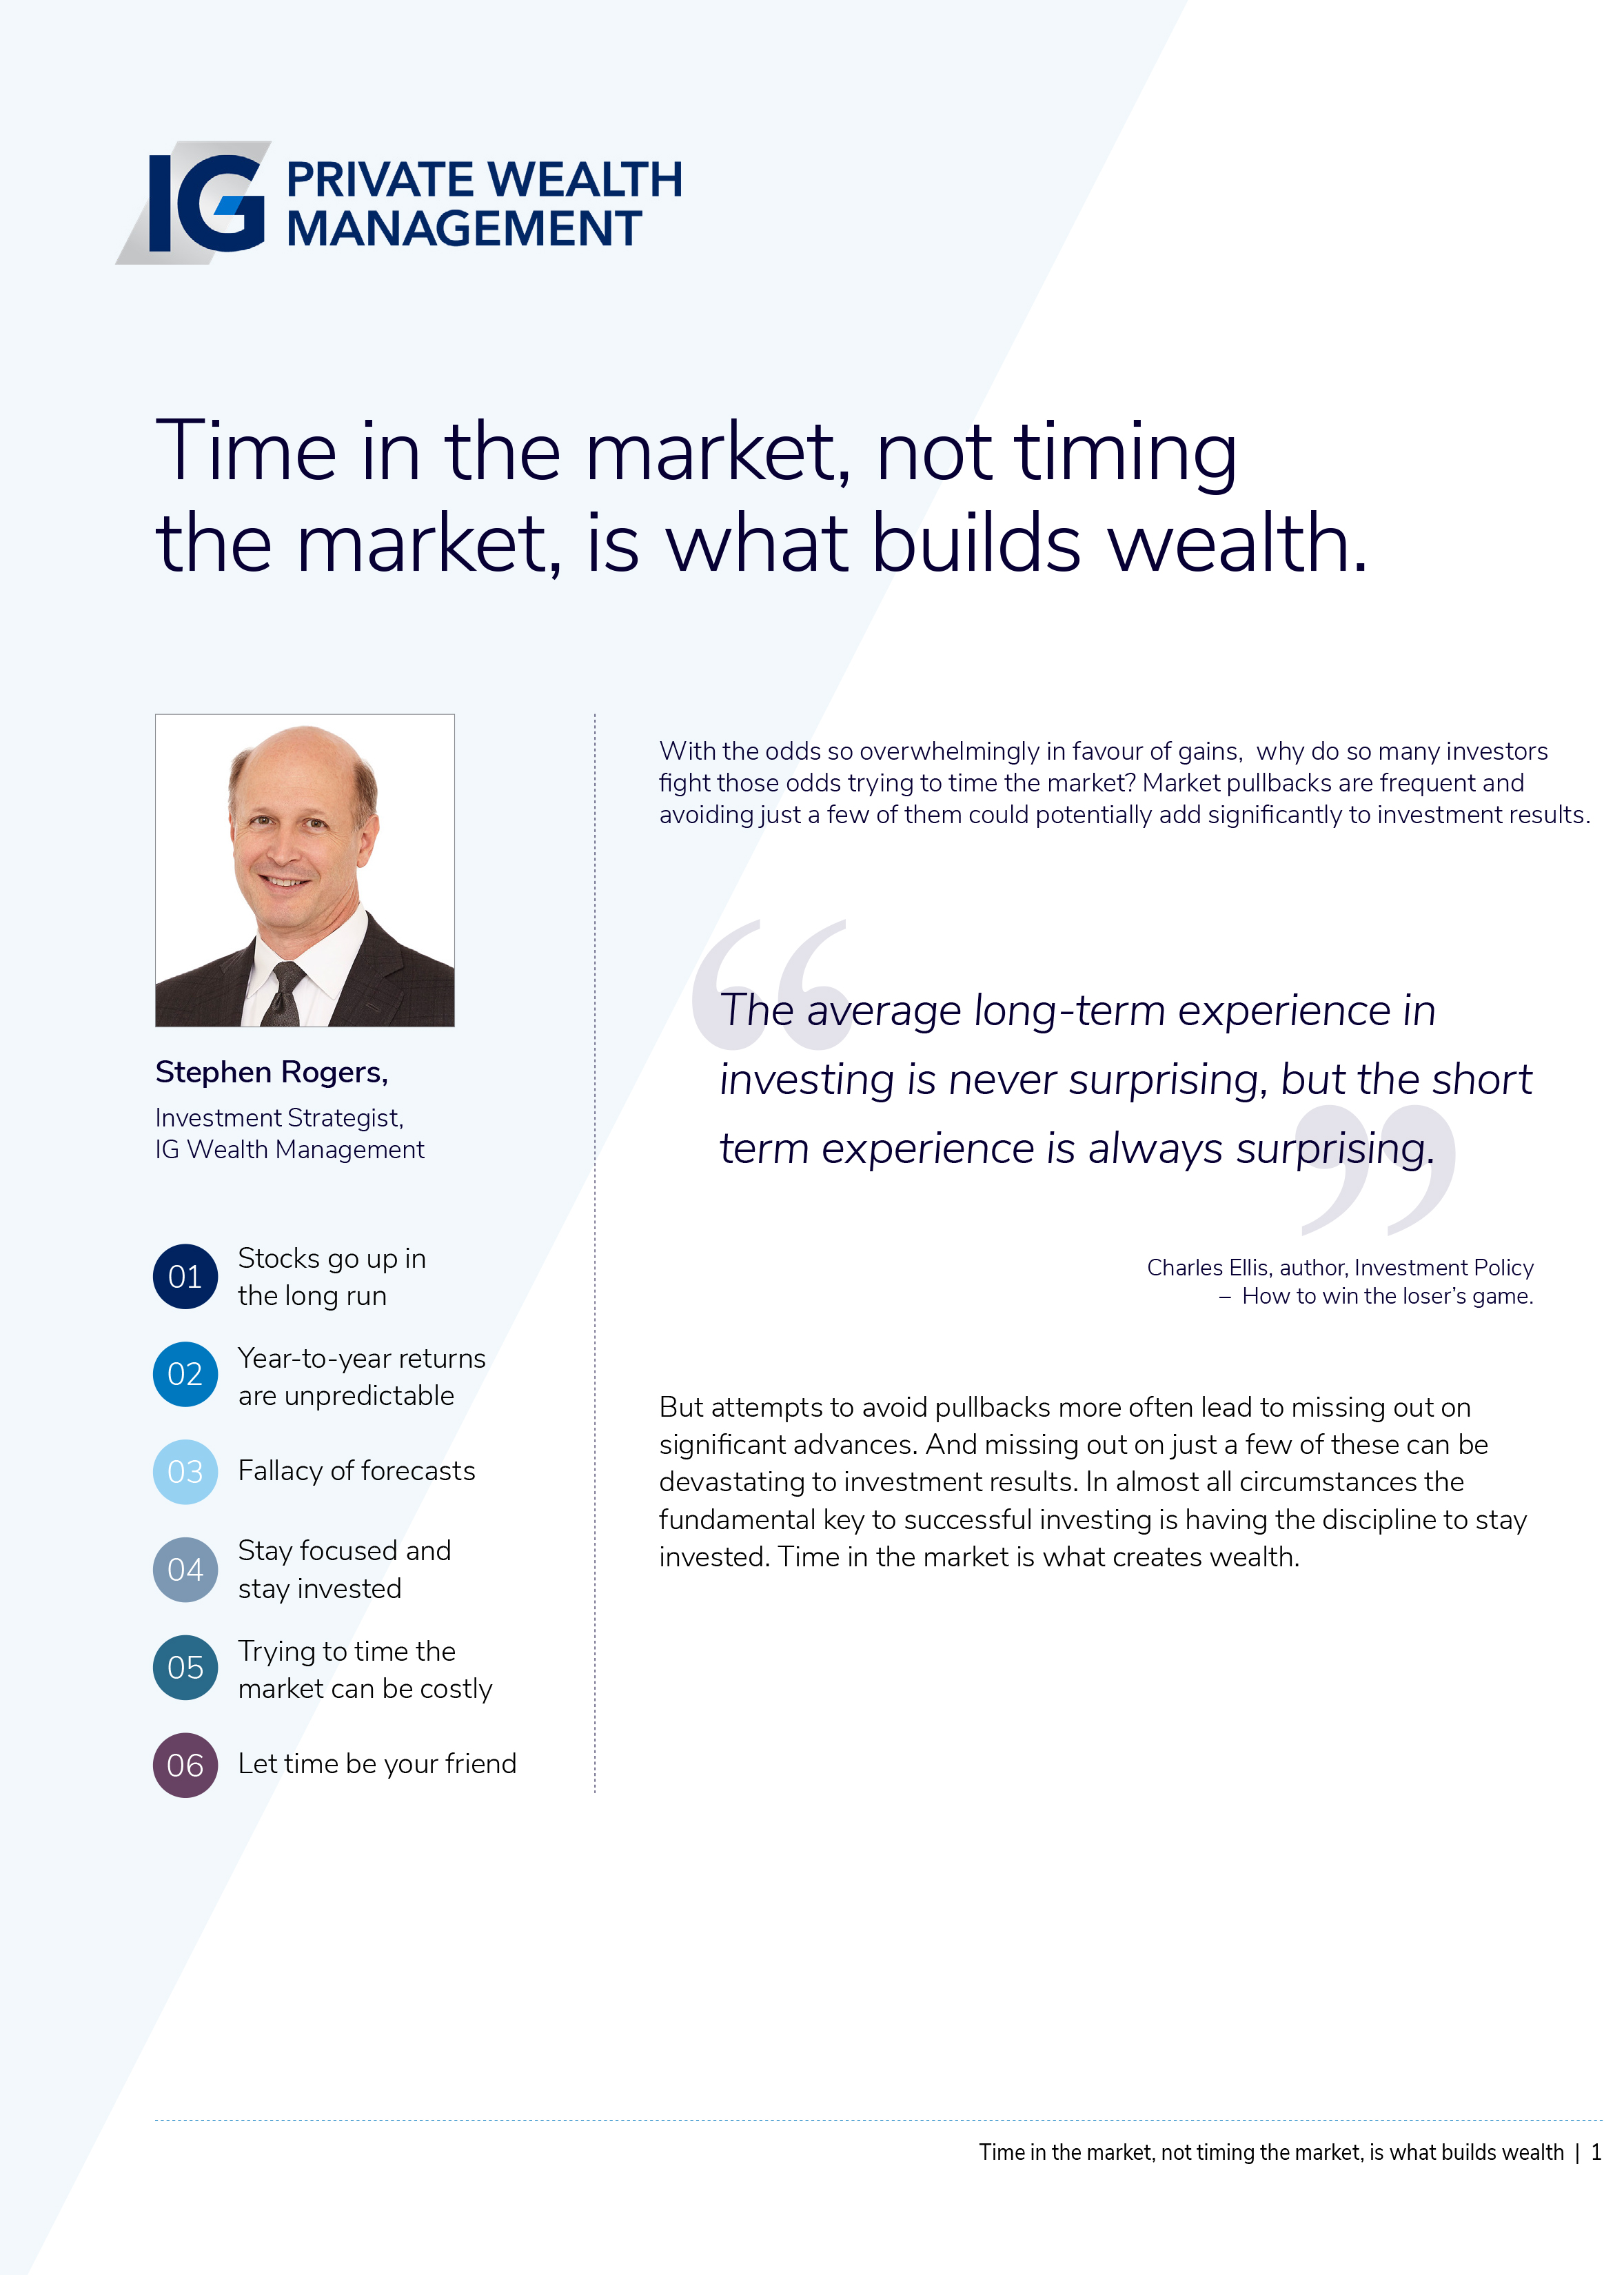 Time in the market, not timing the market, is what builds wealth.